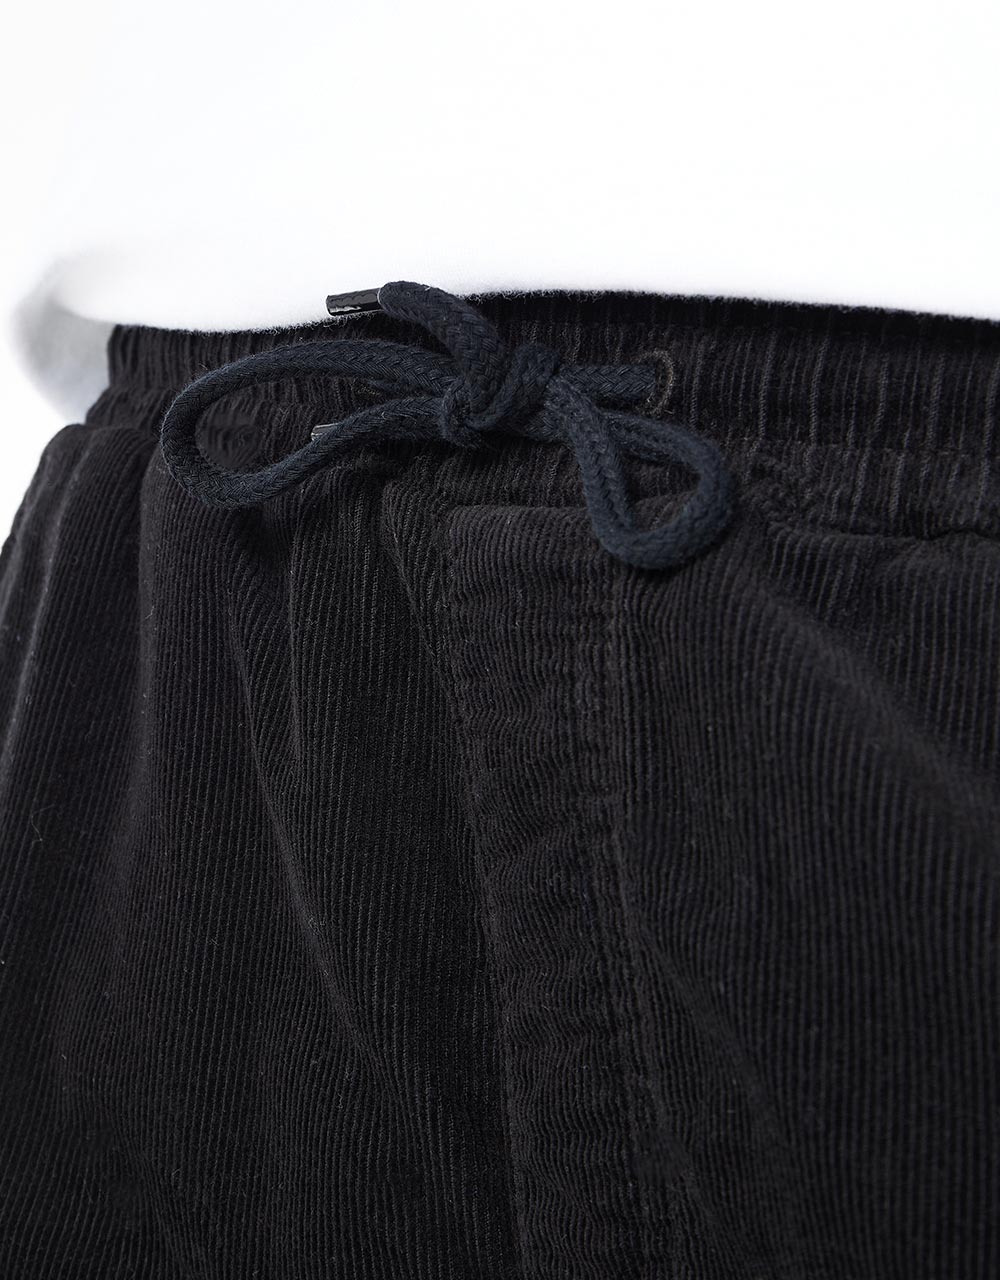 Route One Cord Pool Shorts - Black